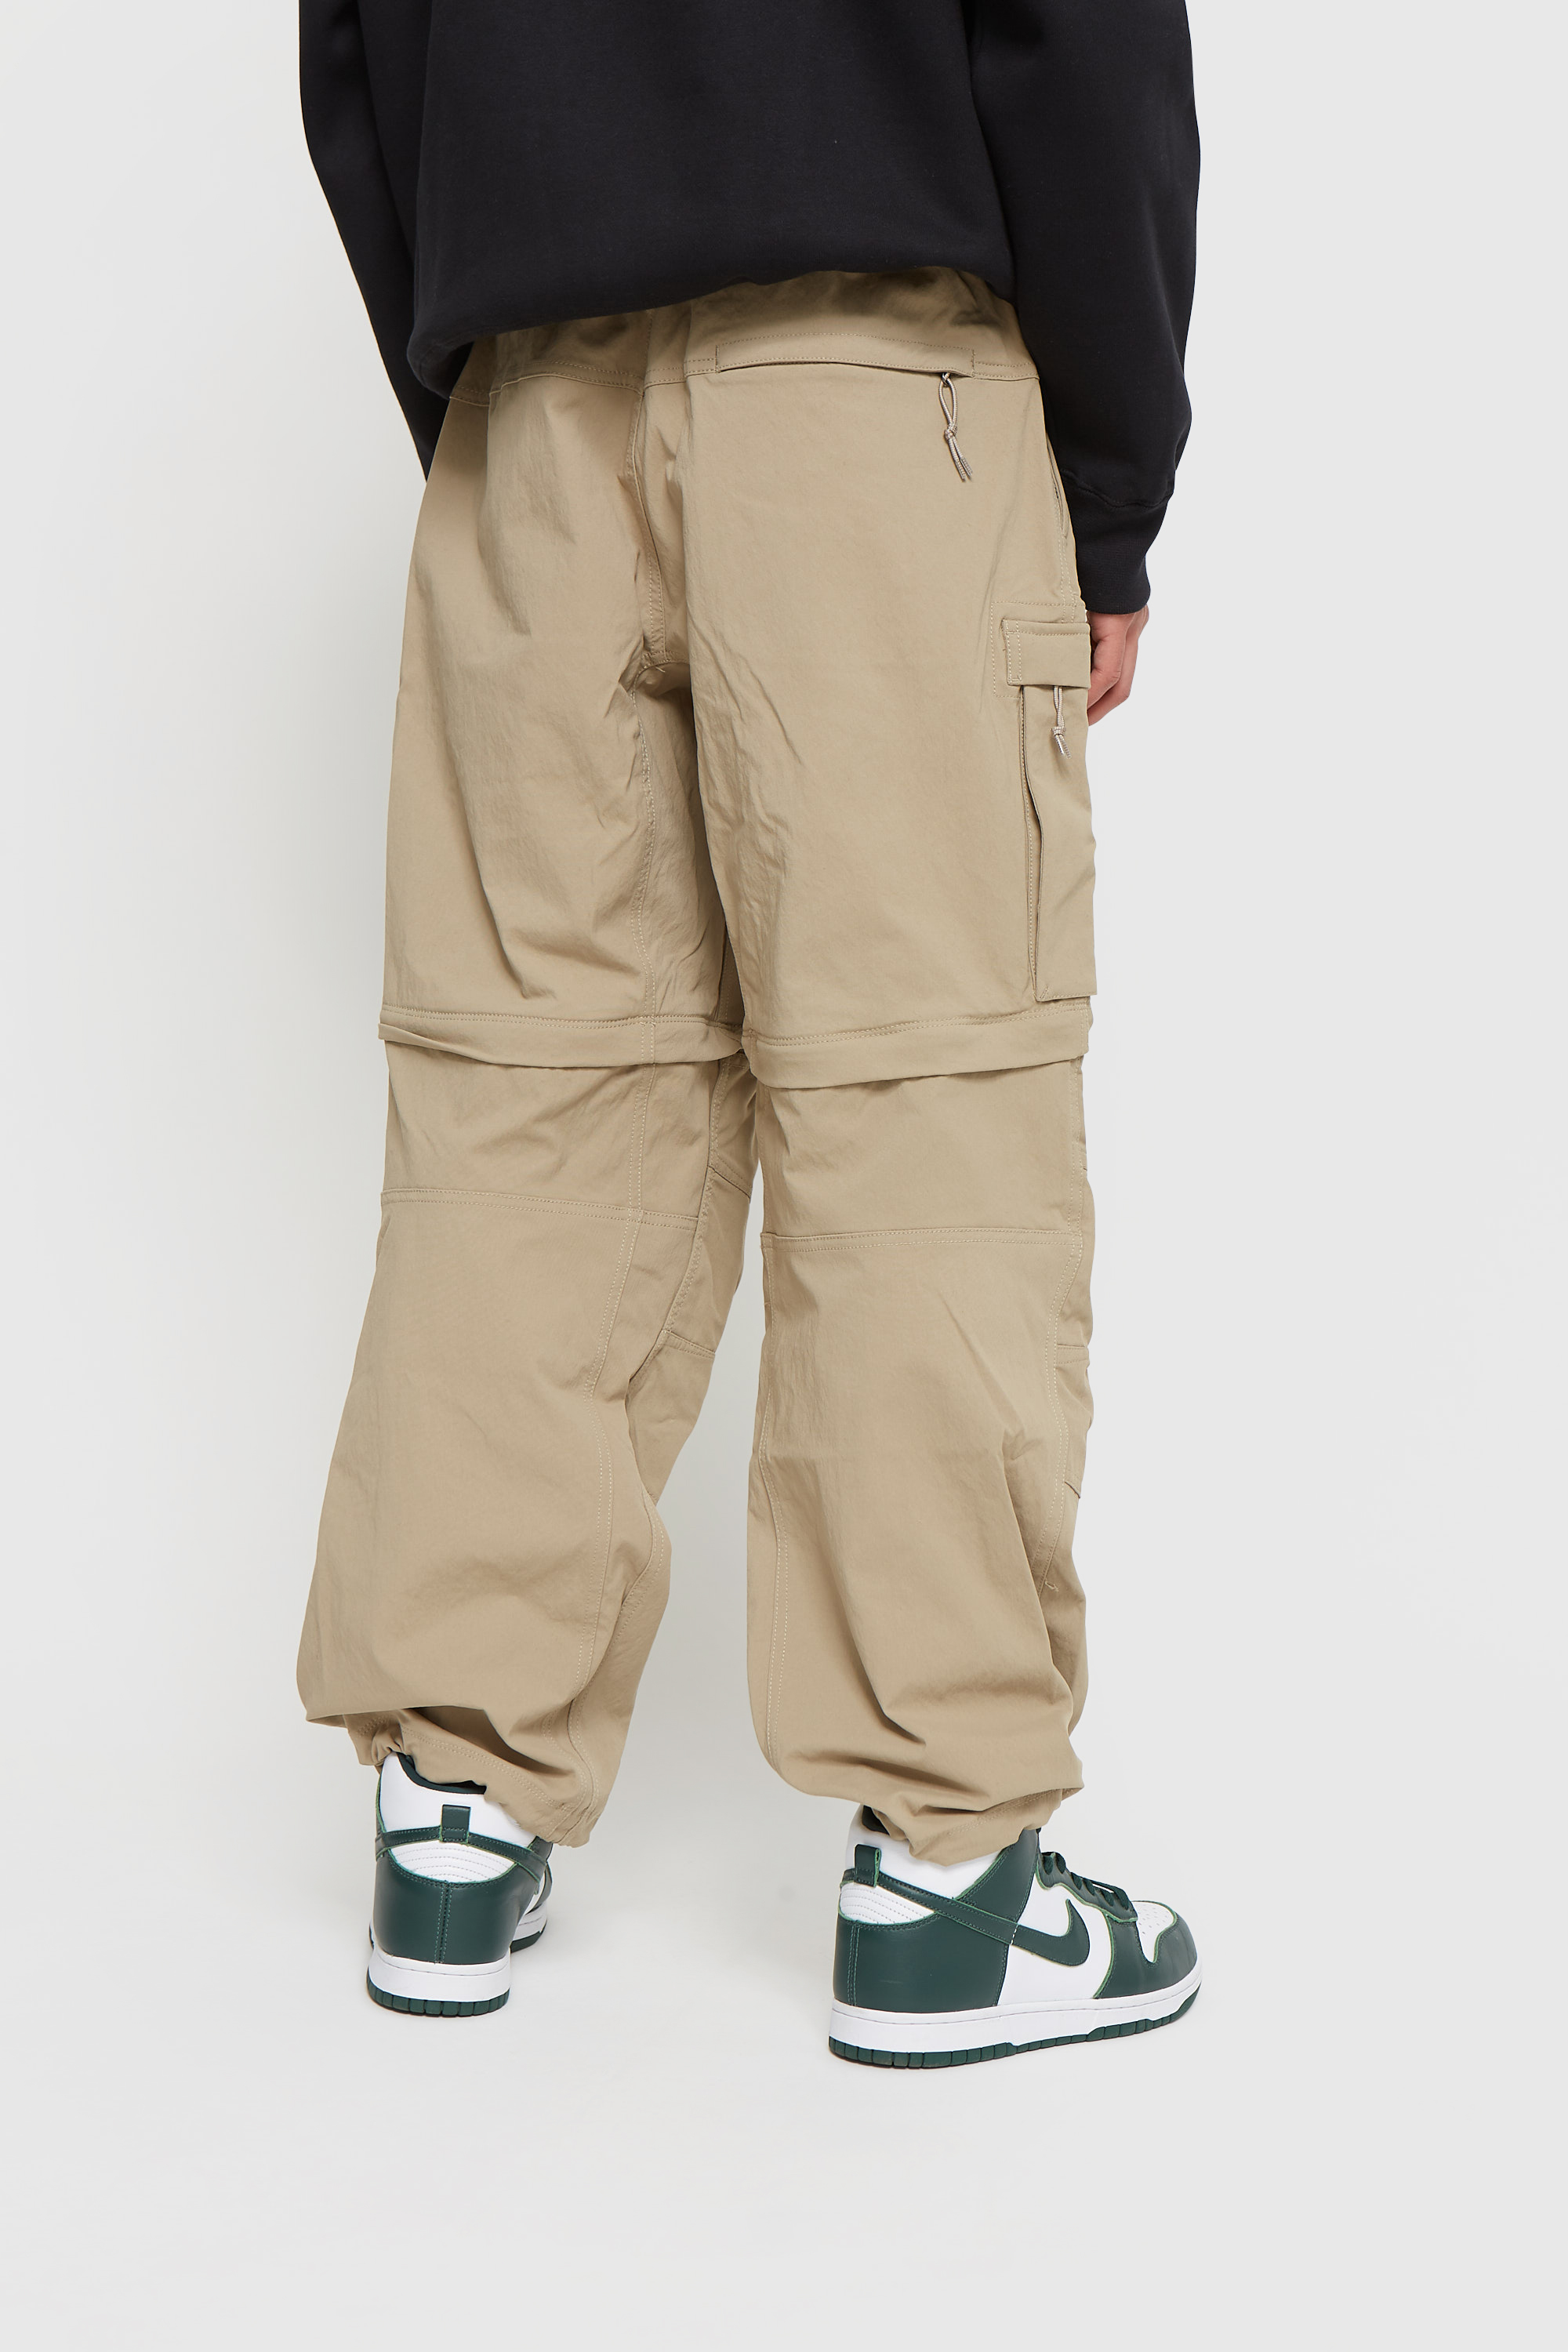 air force 1 with khaki pants